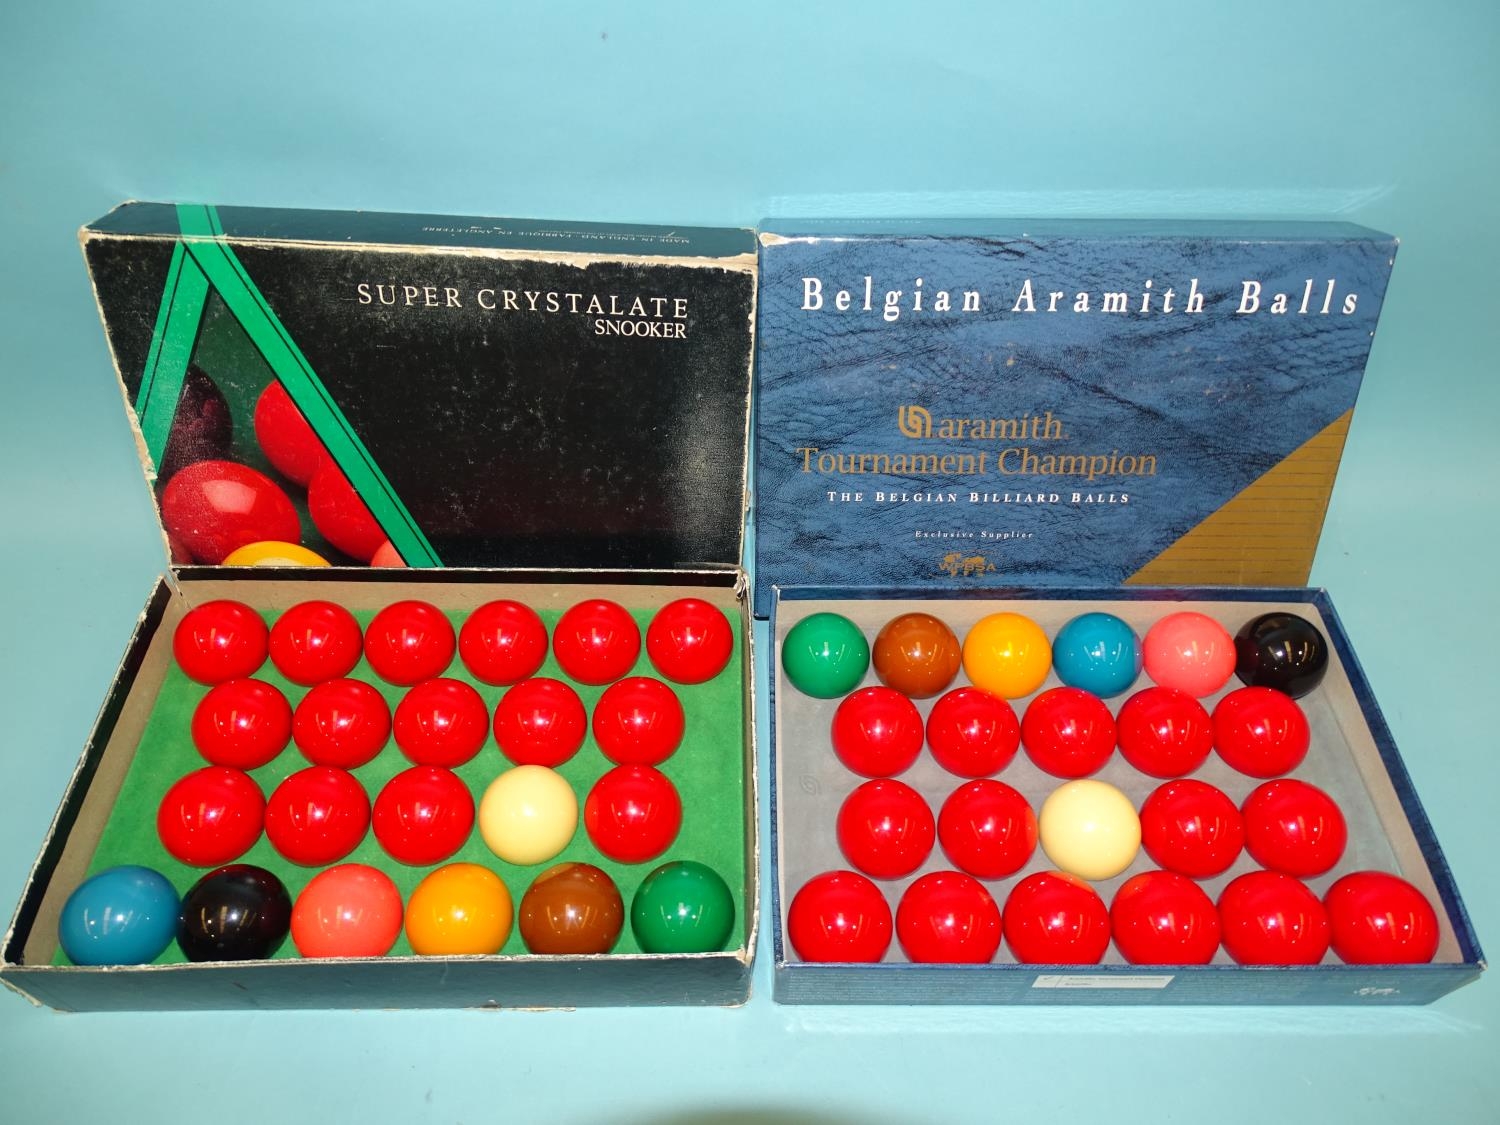 A boxed set of Belgian Aramith Tournament Champion Snooker Balls and a boxed set of Super Crystalate